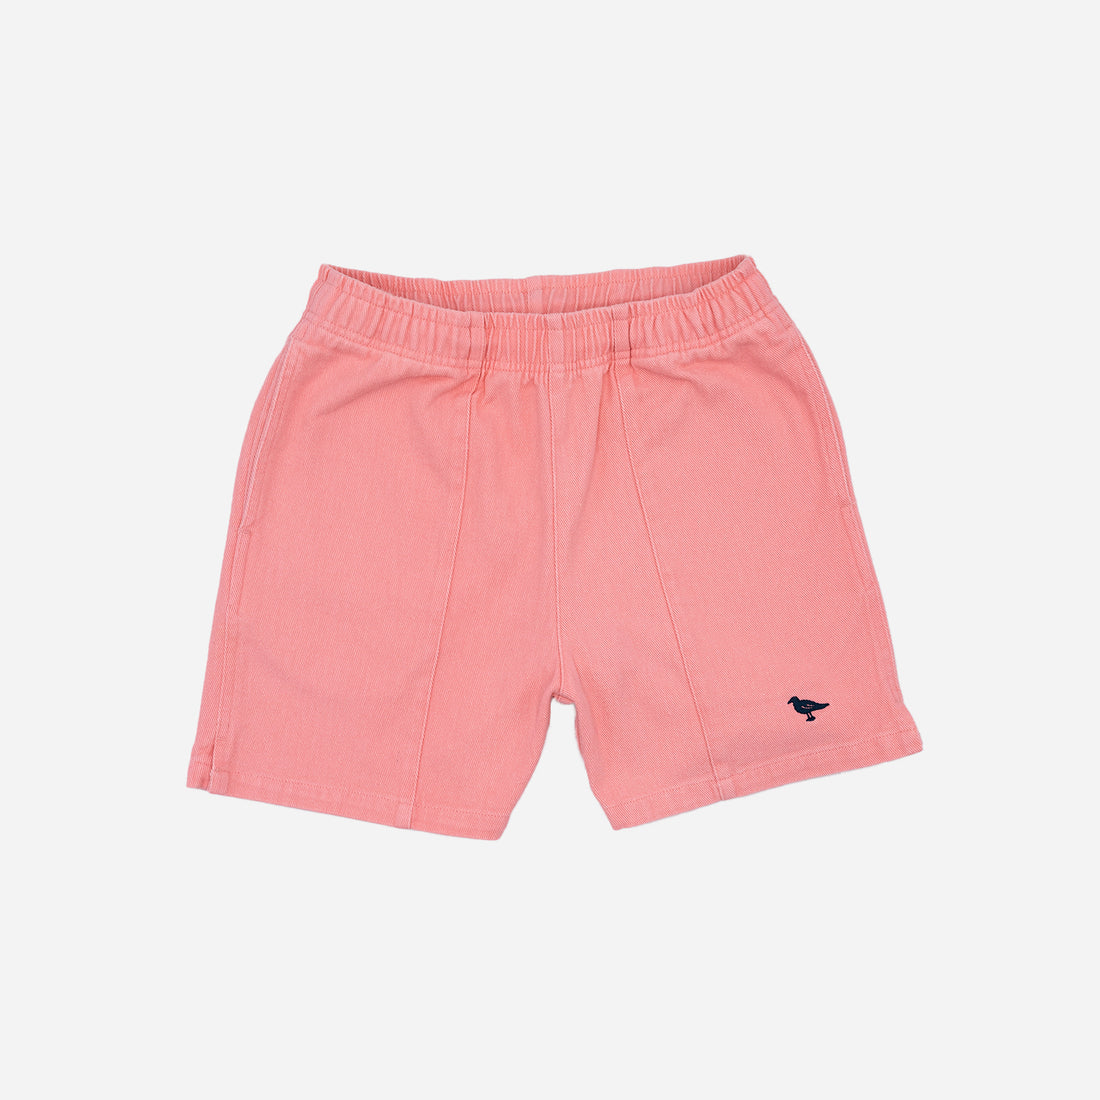 5" Washed Gym Shorts in Pink